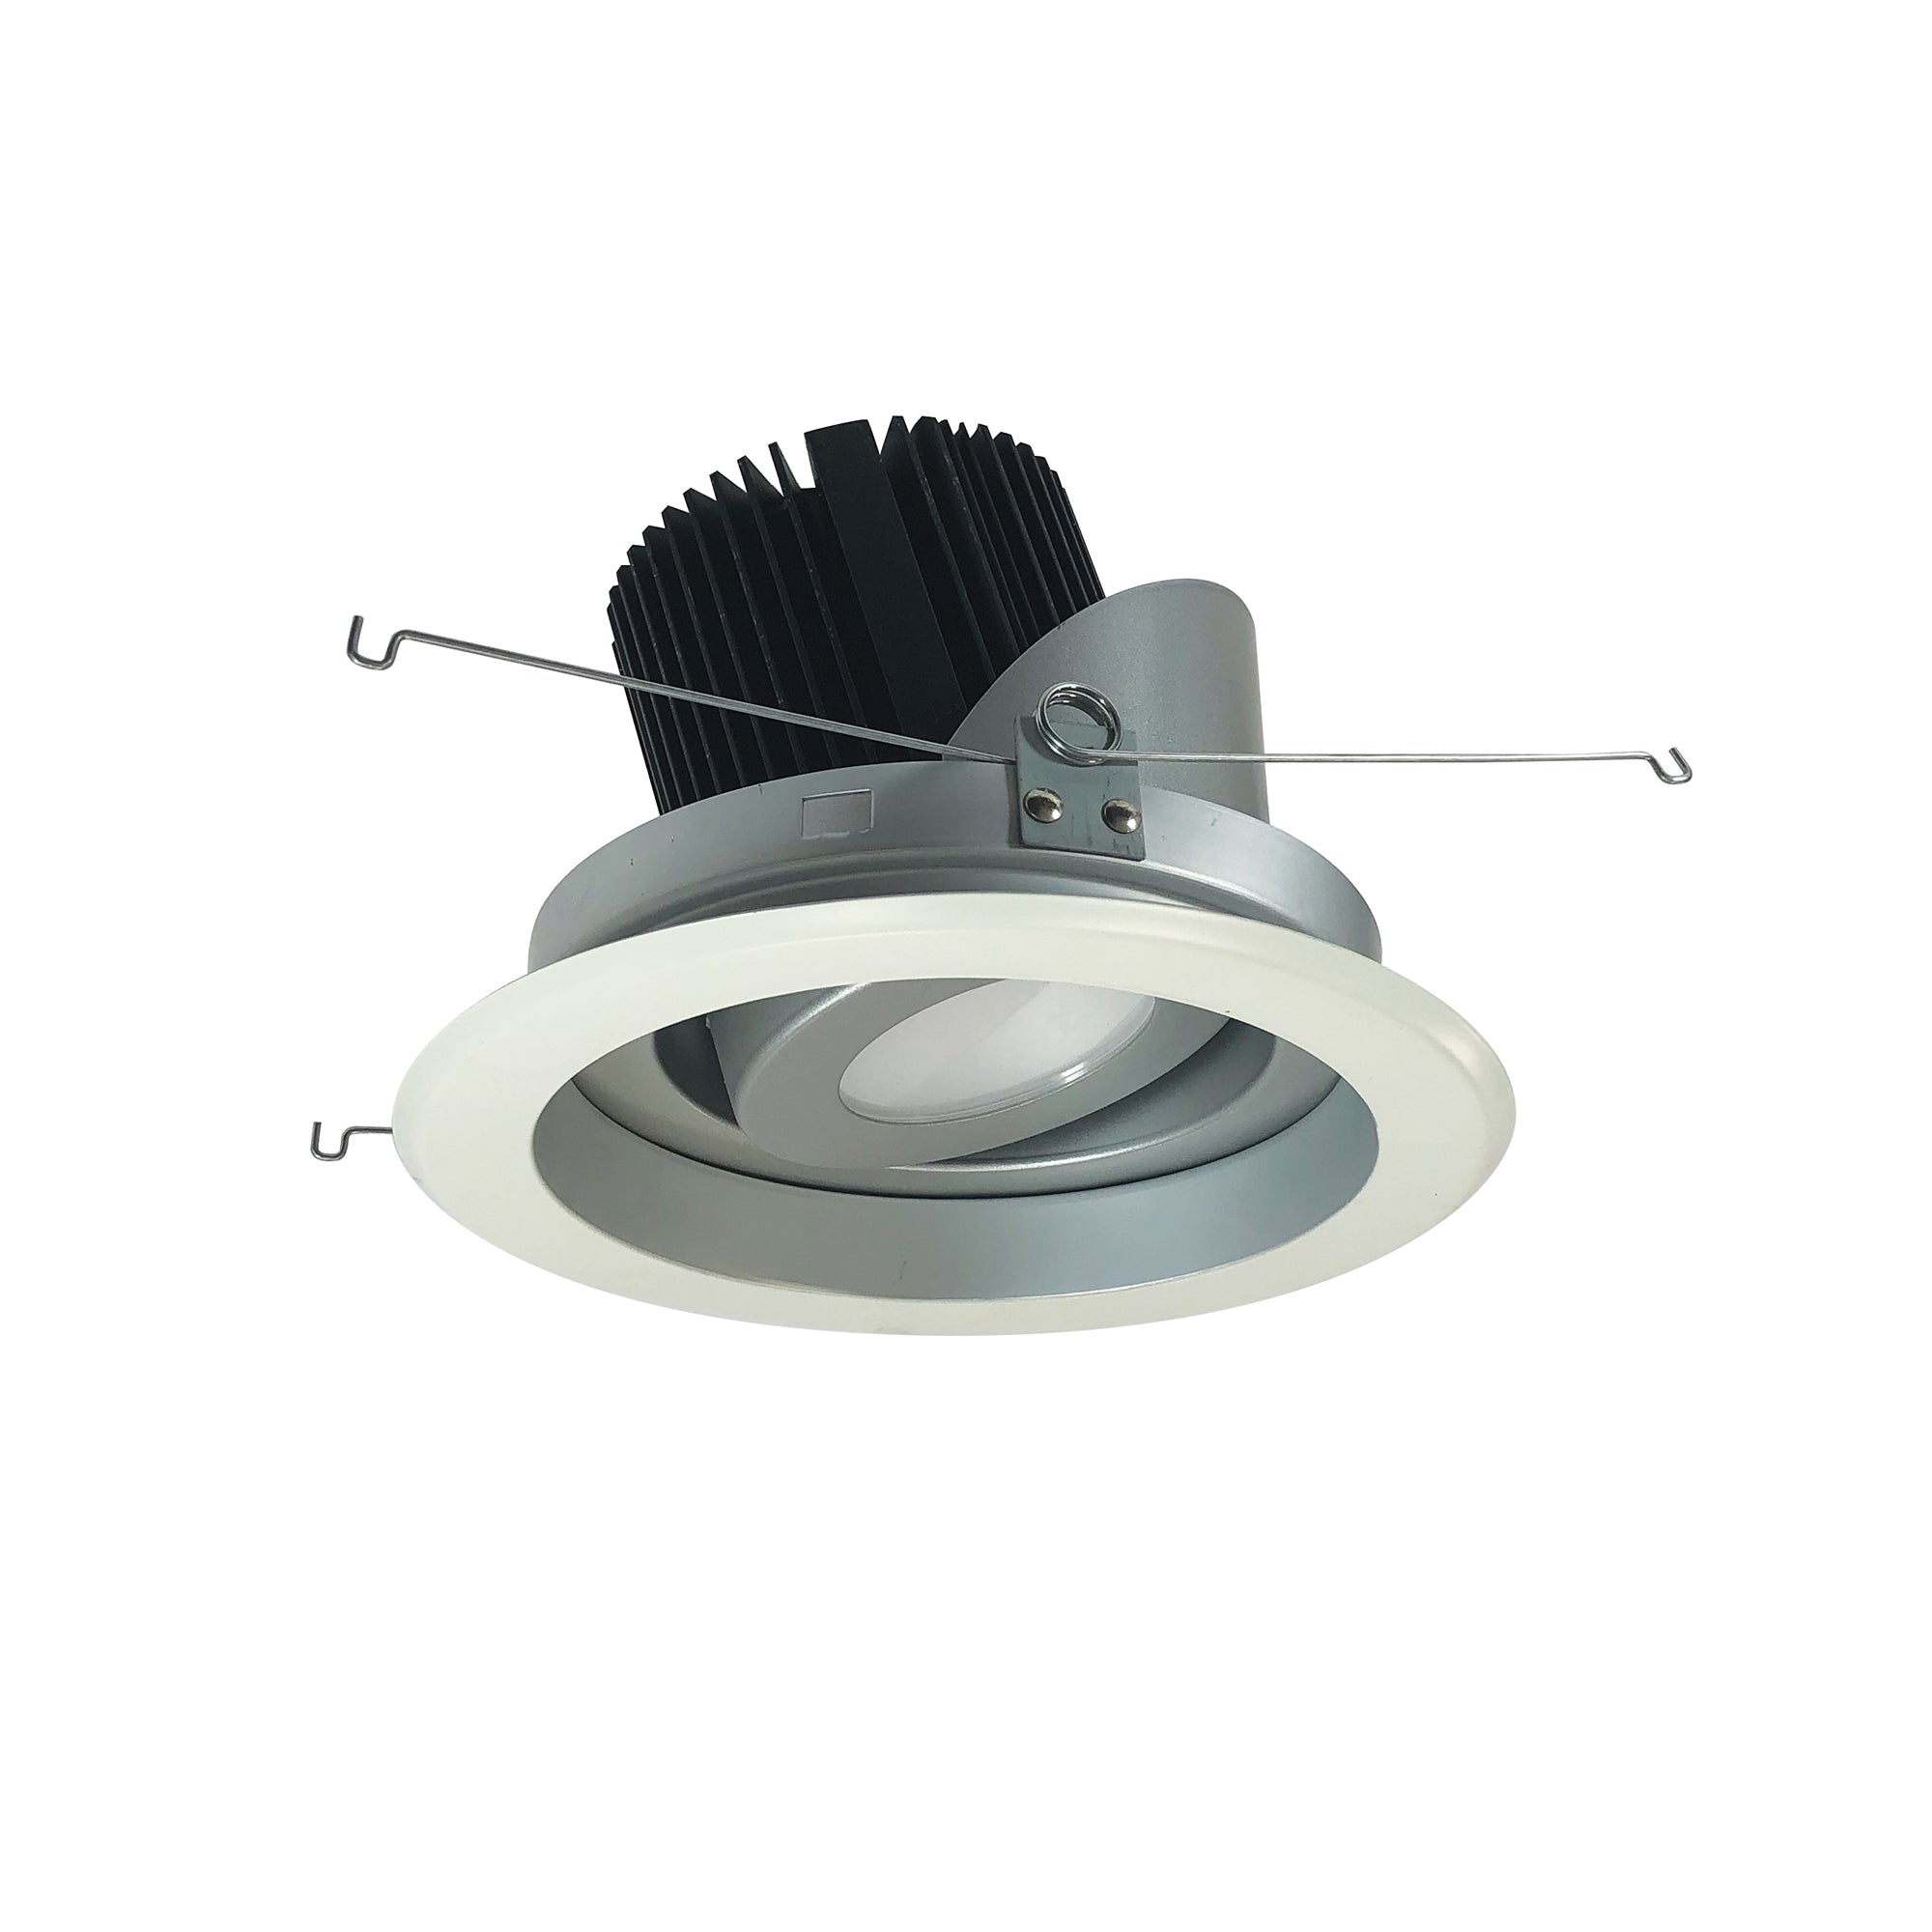 Nora Lighting NRM2-619L2535MHZW - Recessed - 6 Inch Marquise II Round Regressed Adj. Reflector, Medium Flood, 2500lm, 3500K, Haze/White (Not Compatible with NHRM2-625 Housings)